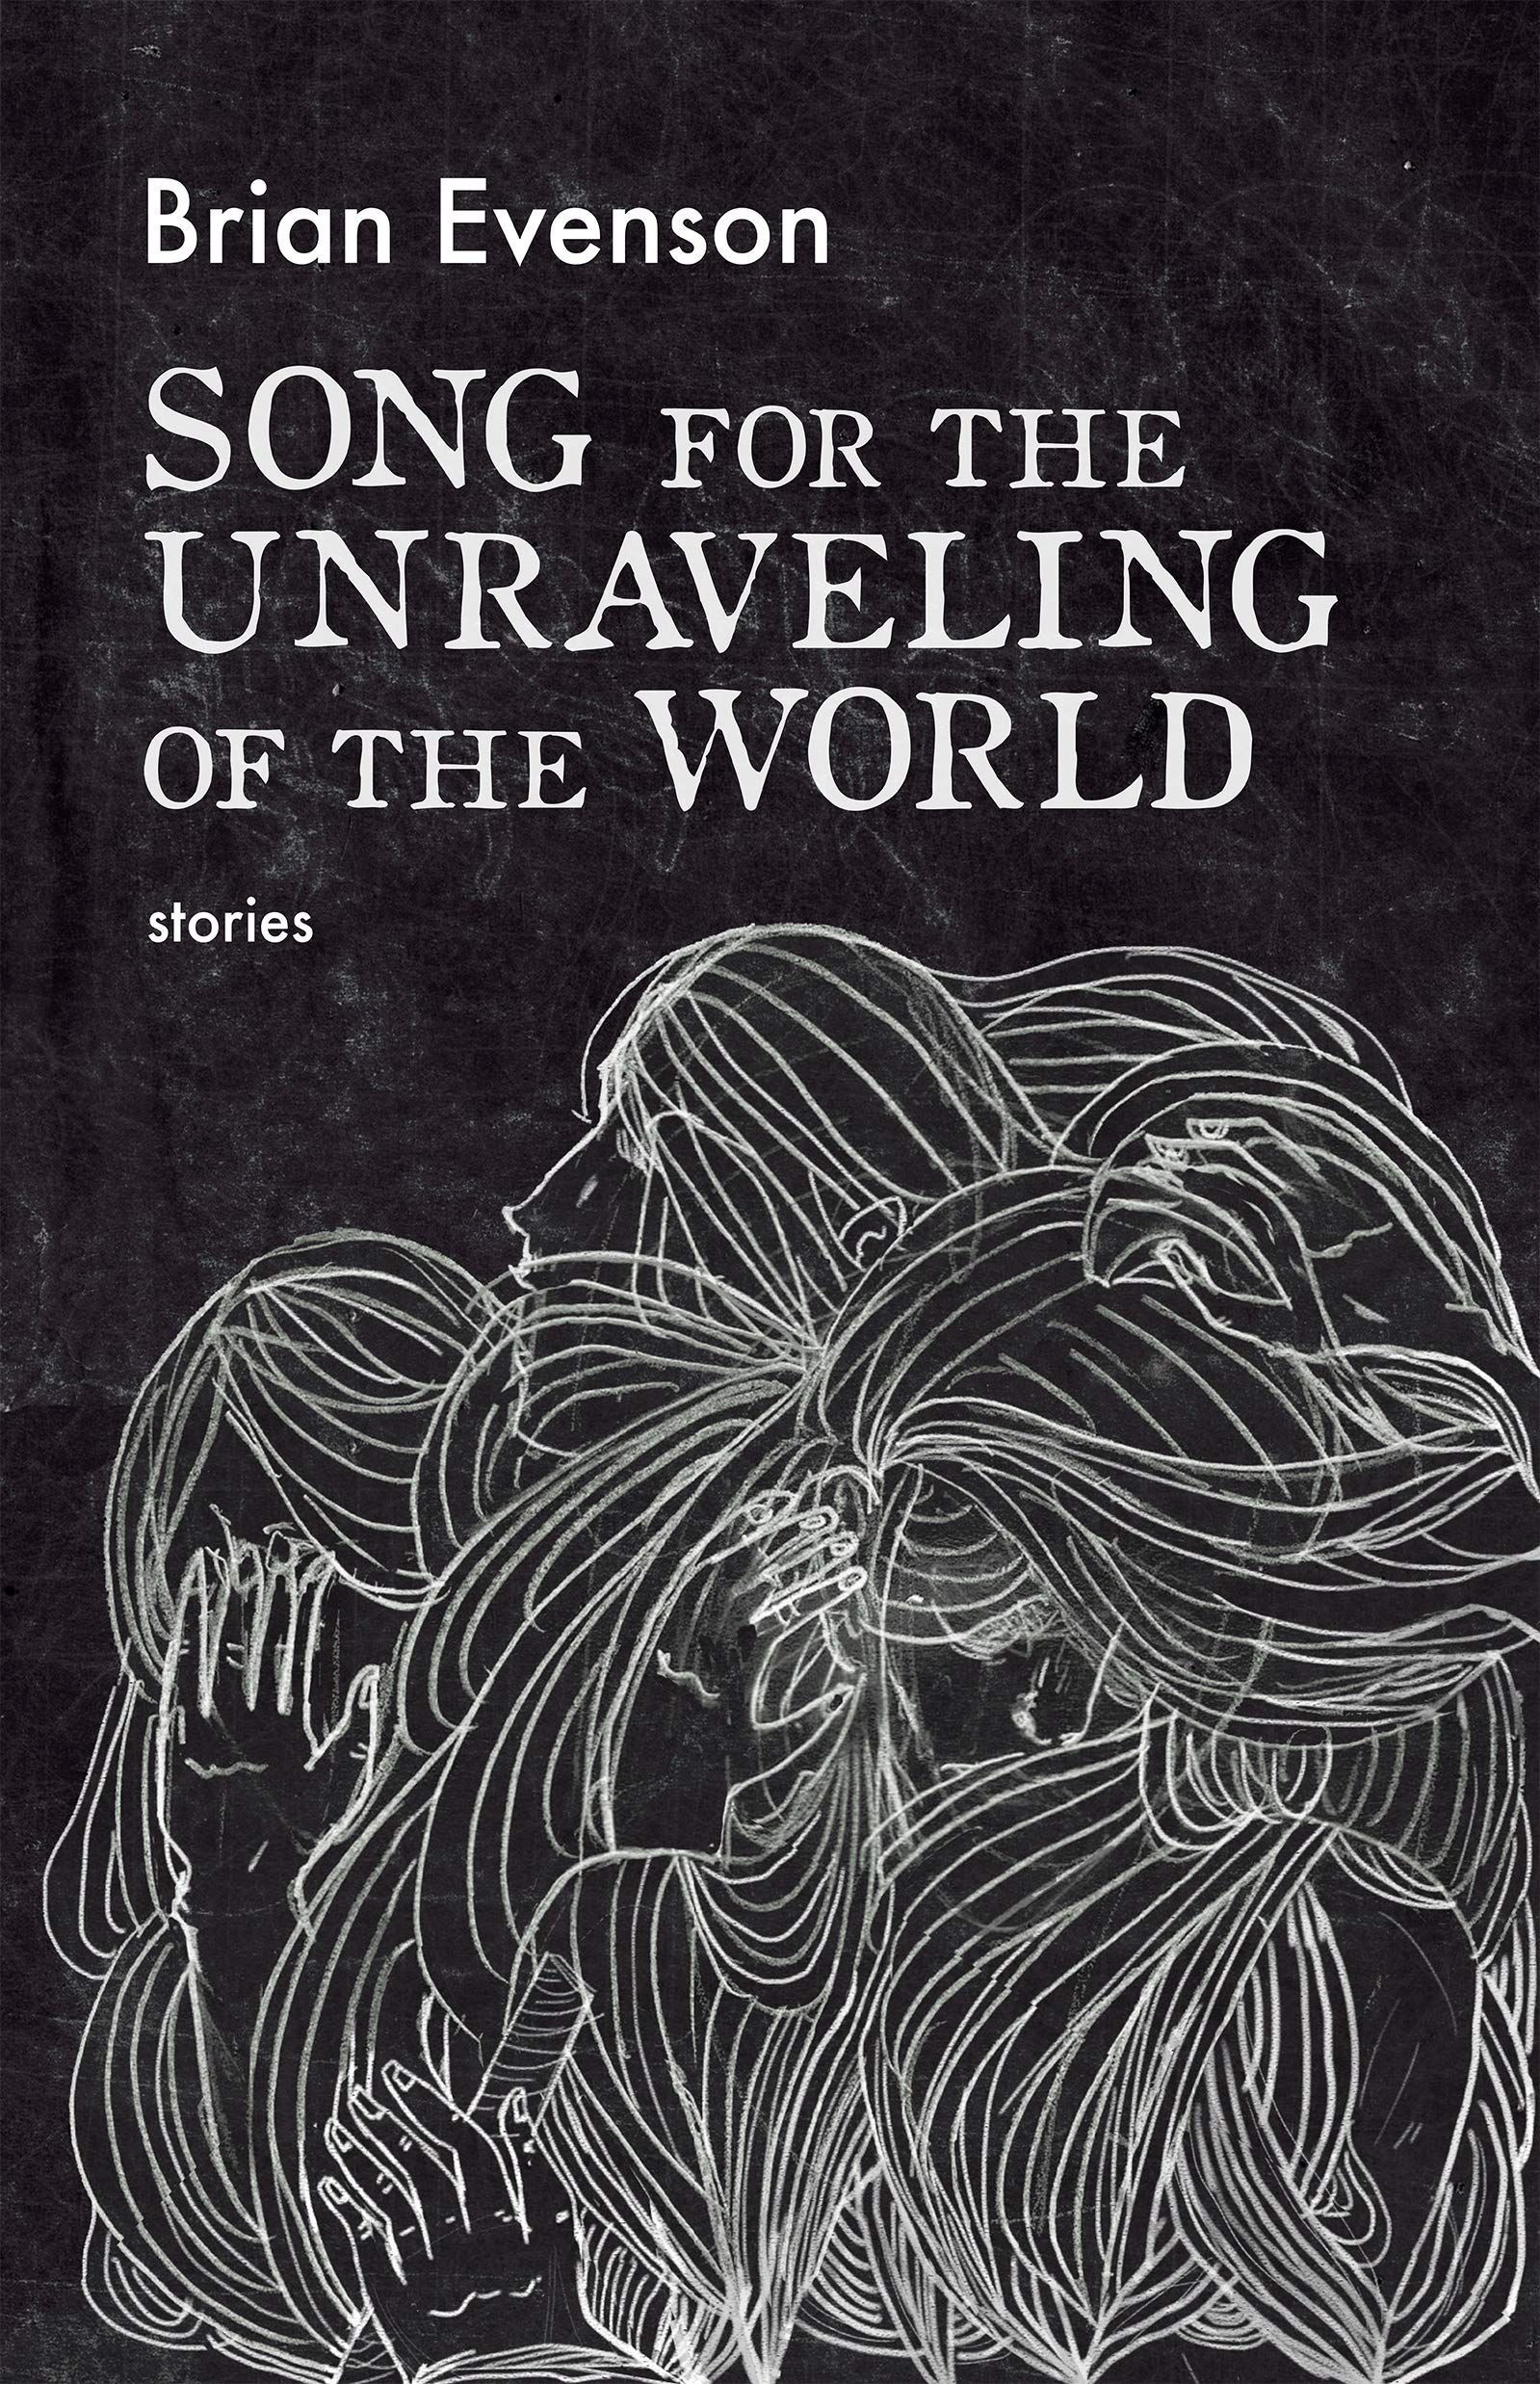 It’s All Part of the Plan: On Brian Evenson’s “Song for the Unraveling of the World”